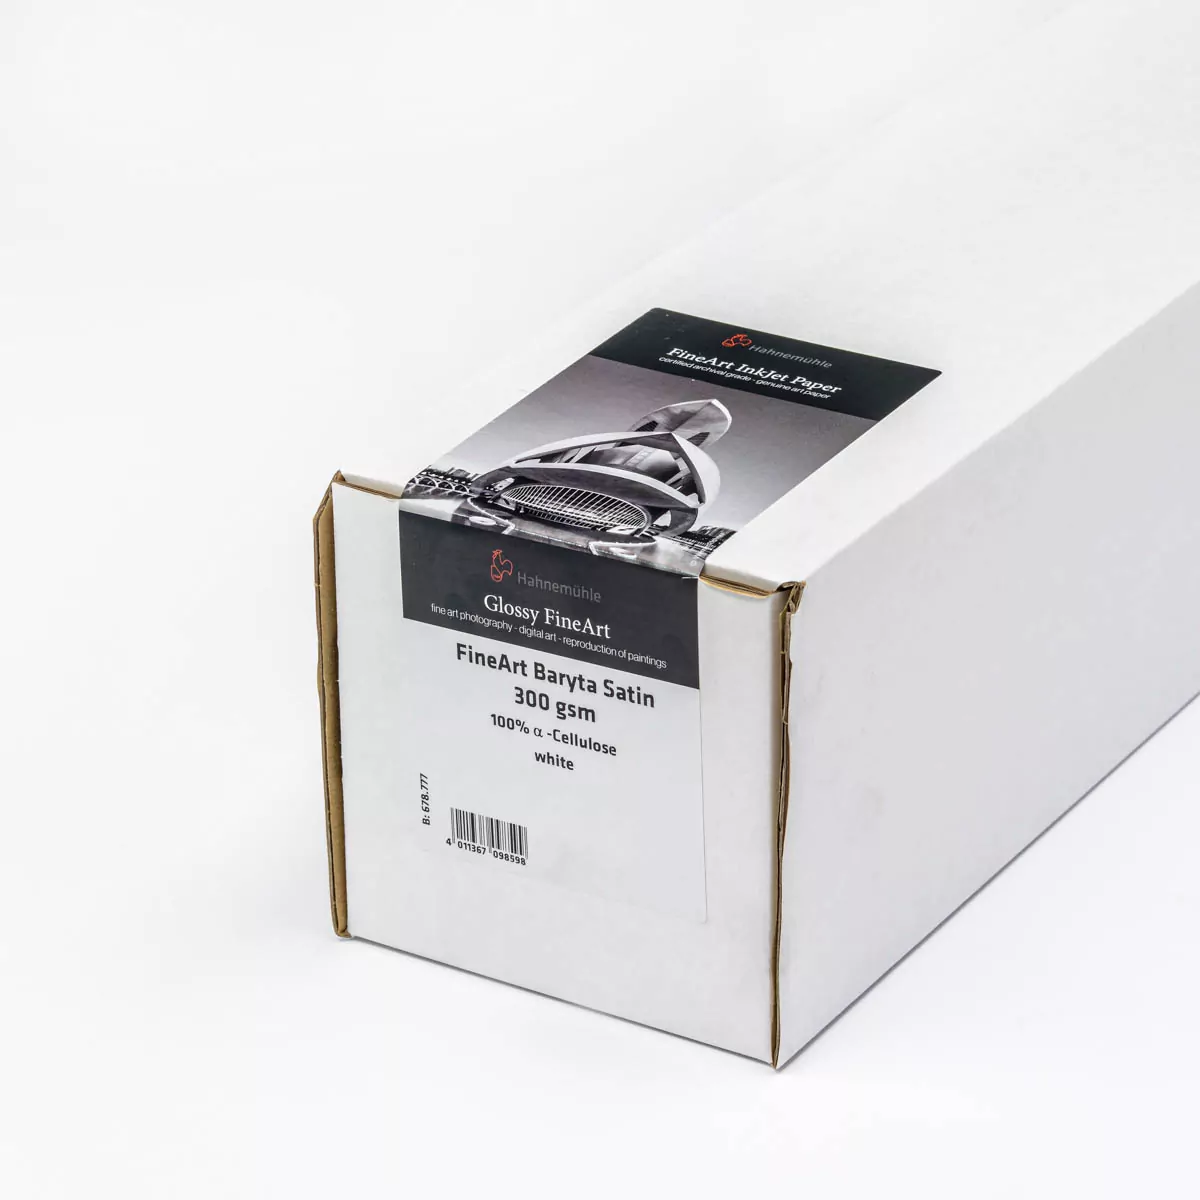 Hahnemuhle FineArt Baryta Satin 300gsm 44”(111cm)x12m roll